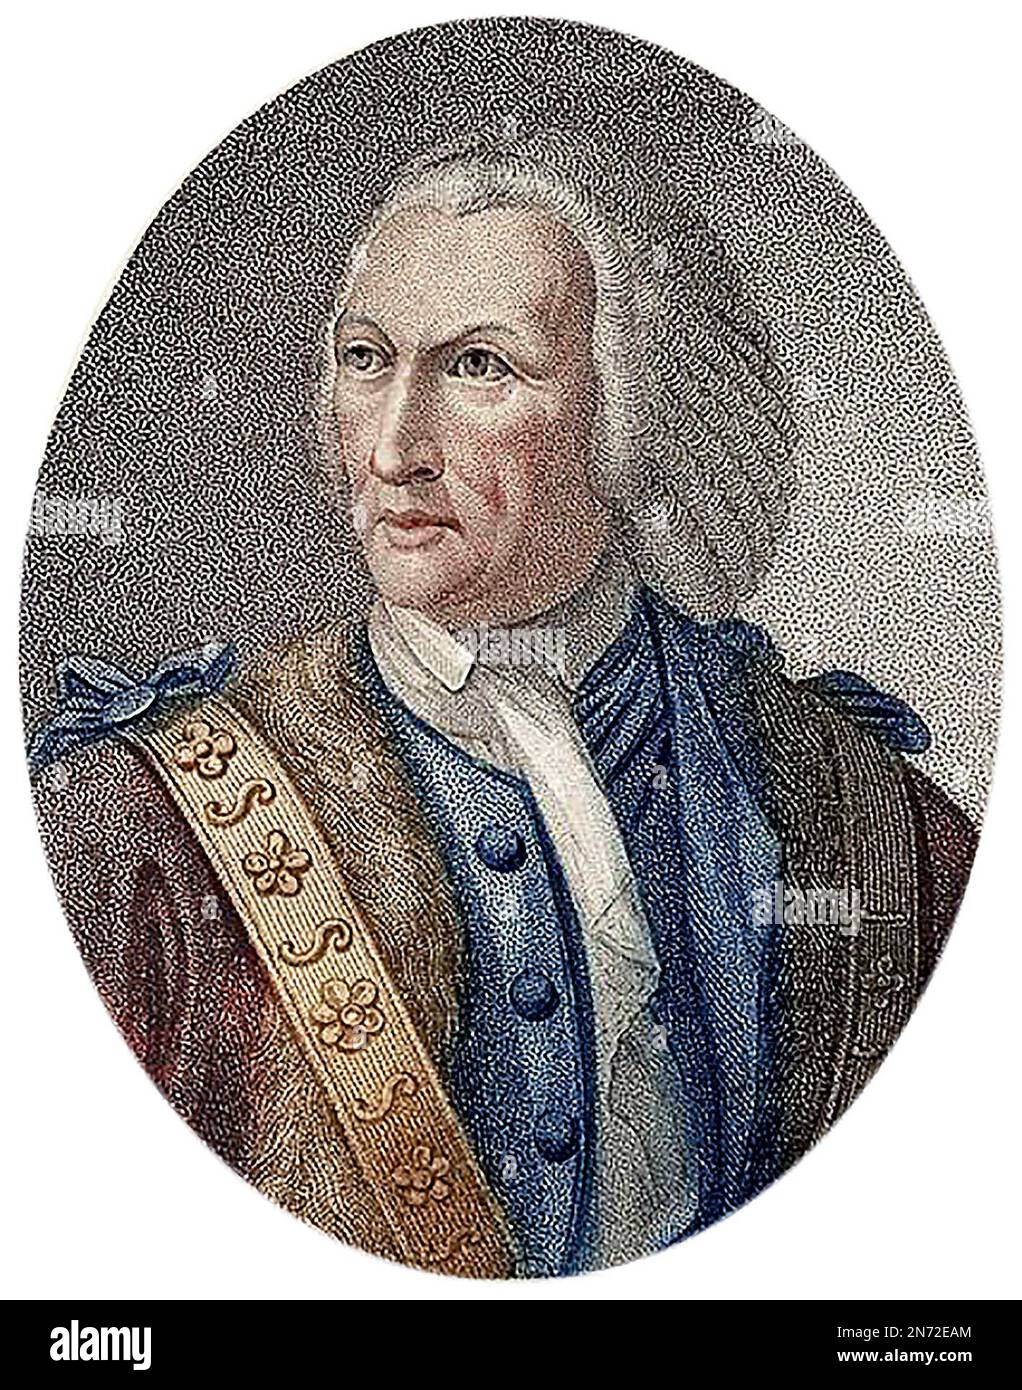 William Beckford. Portrait of the English political figure who was twice Lord Mayor of London, William Beckford (1709-1770) Stock Photo